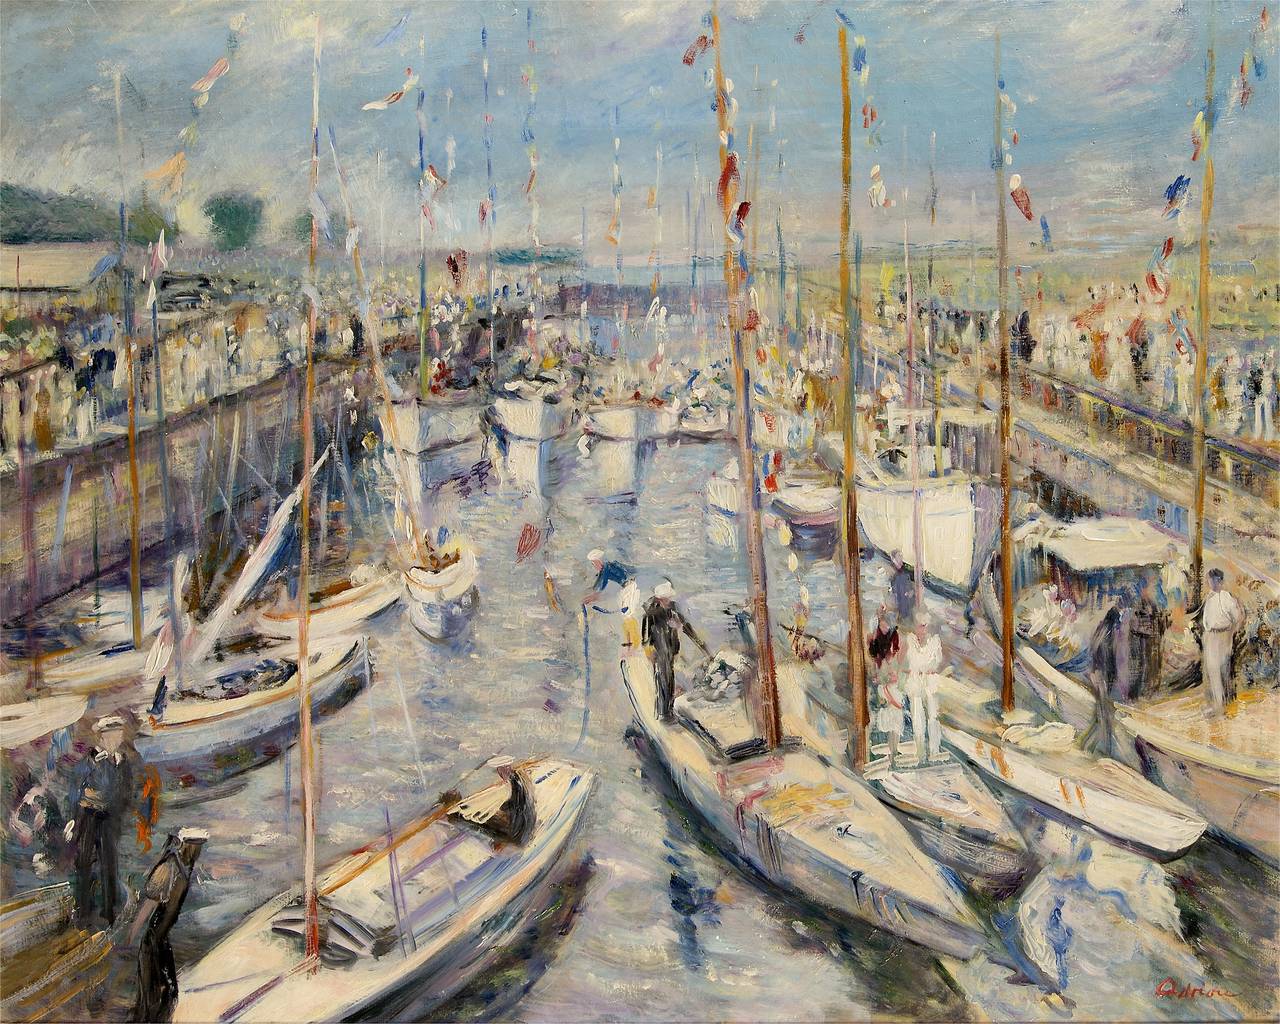 Regatta, France - Painting by Lucien Adrion